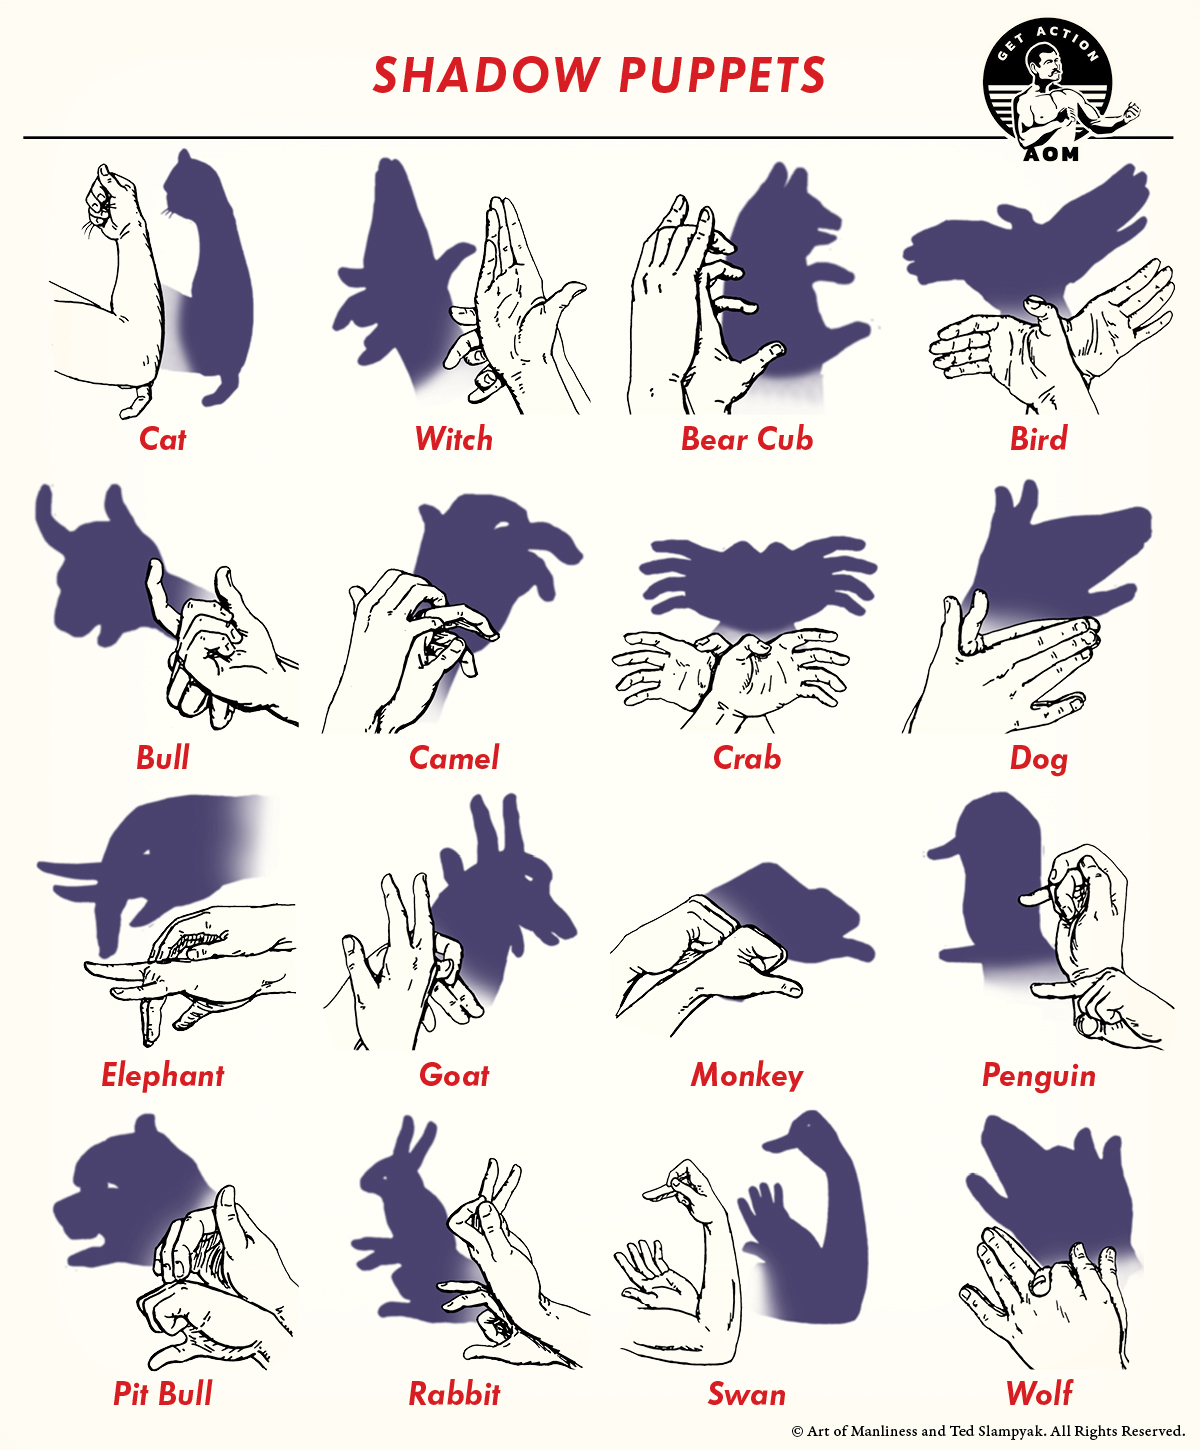 Create a poster showcasing 16 different types of shadow puppets.